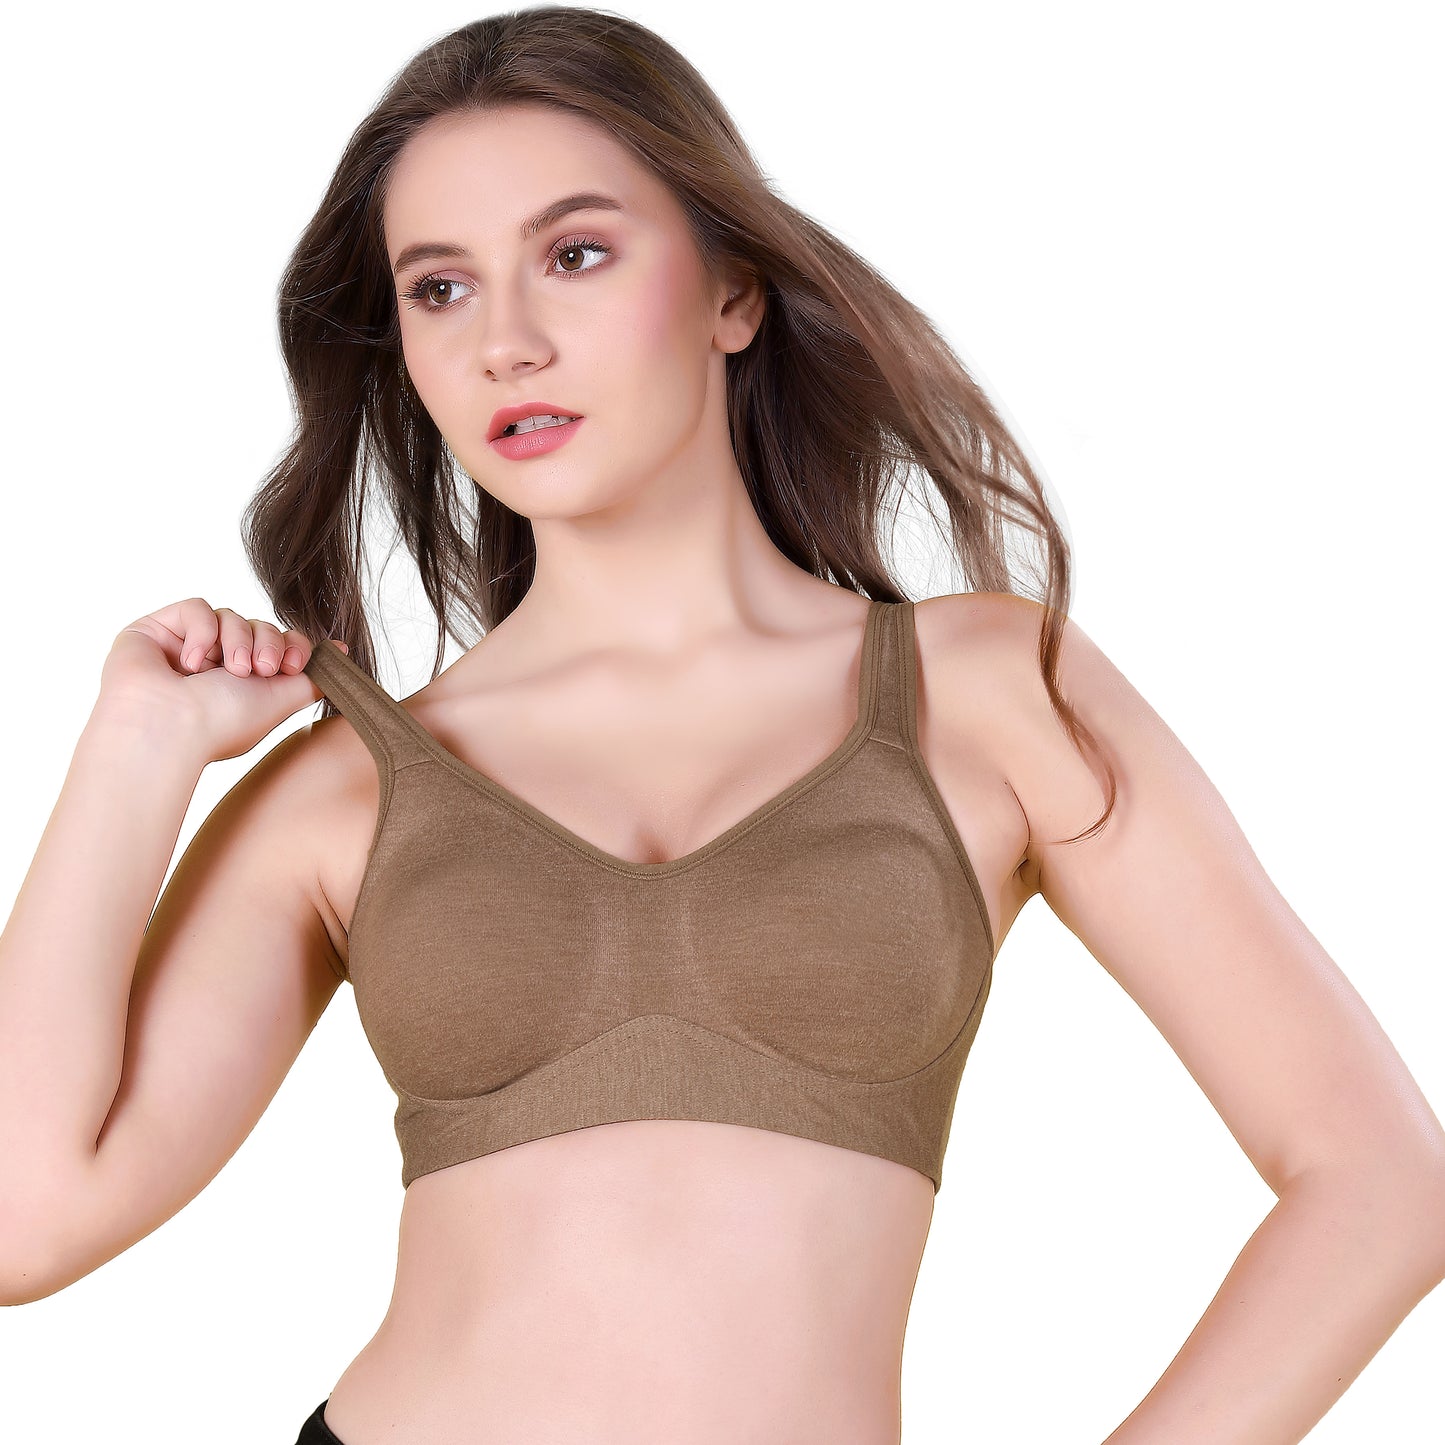 MINIMISER BRA / C & D CUP / NON-PADDED / NON-WIRED / DAILY WEAR / FULL CUP BRA